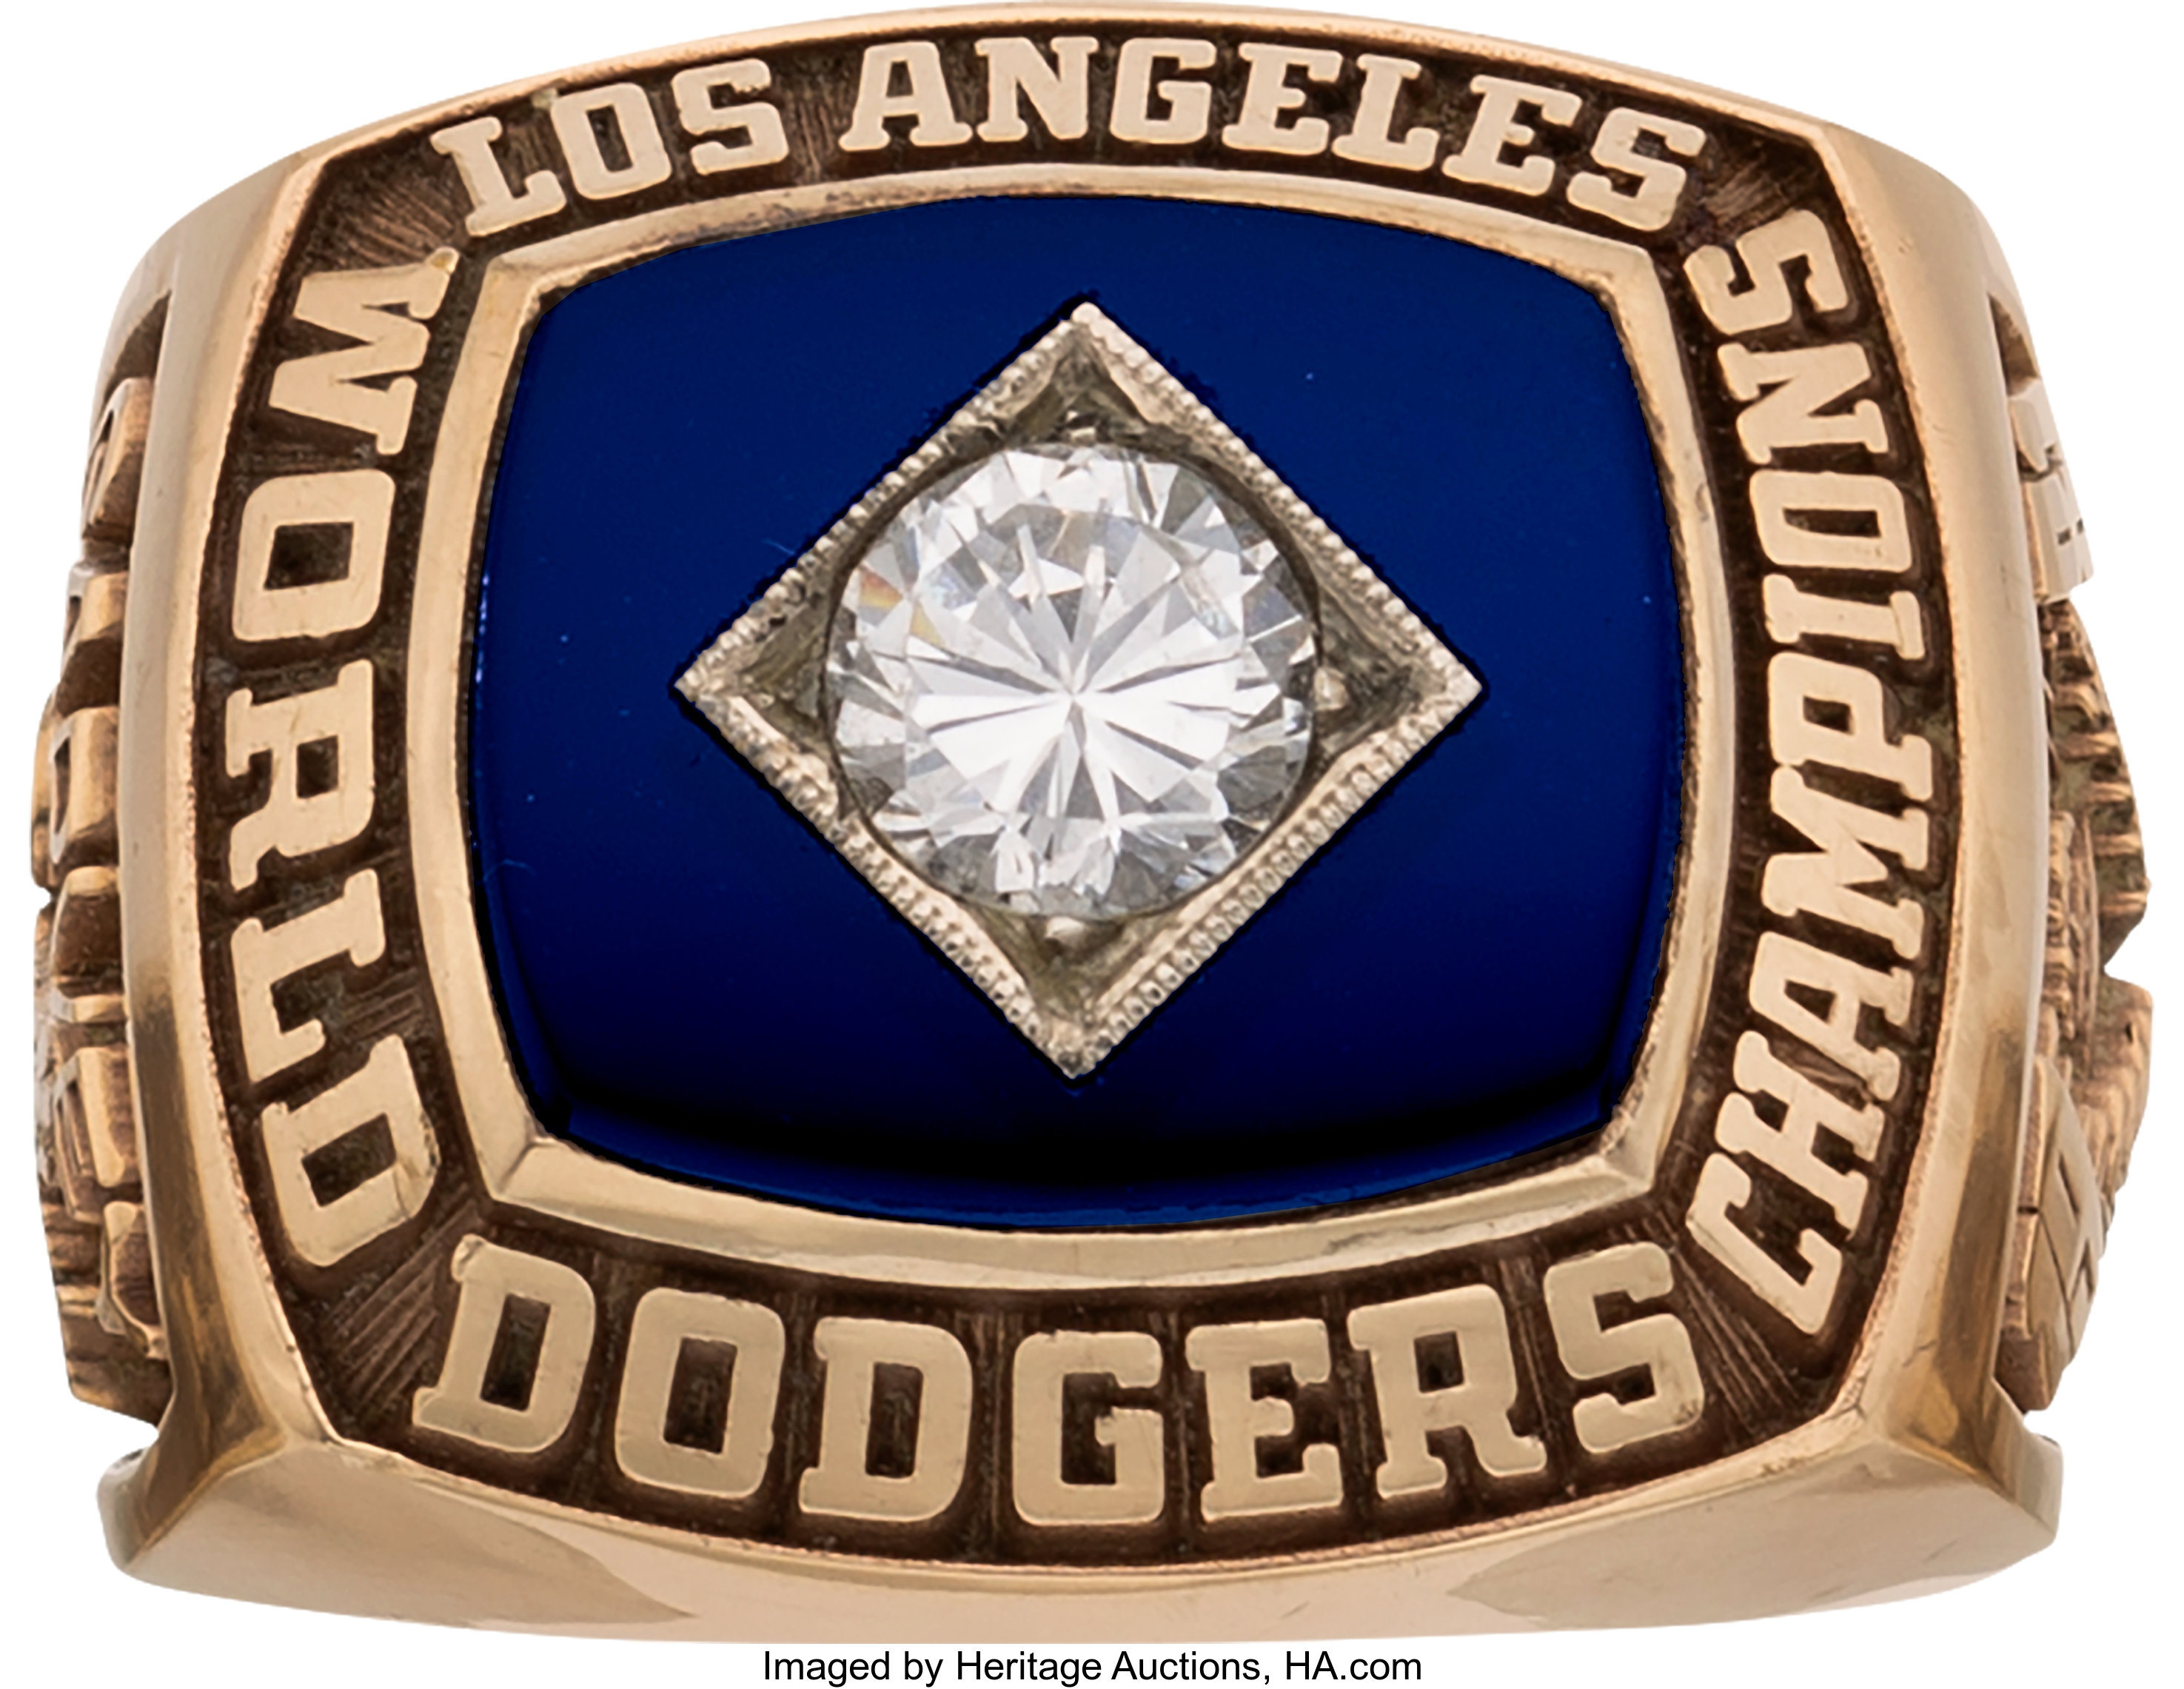 Pictures: Dodgers' World Series rings feature 232 diamonds - Los